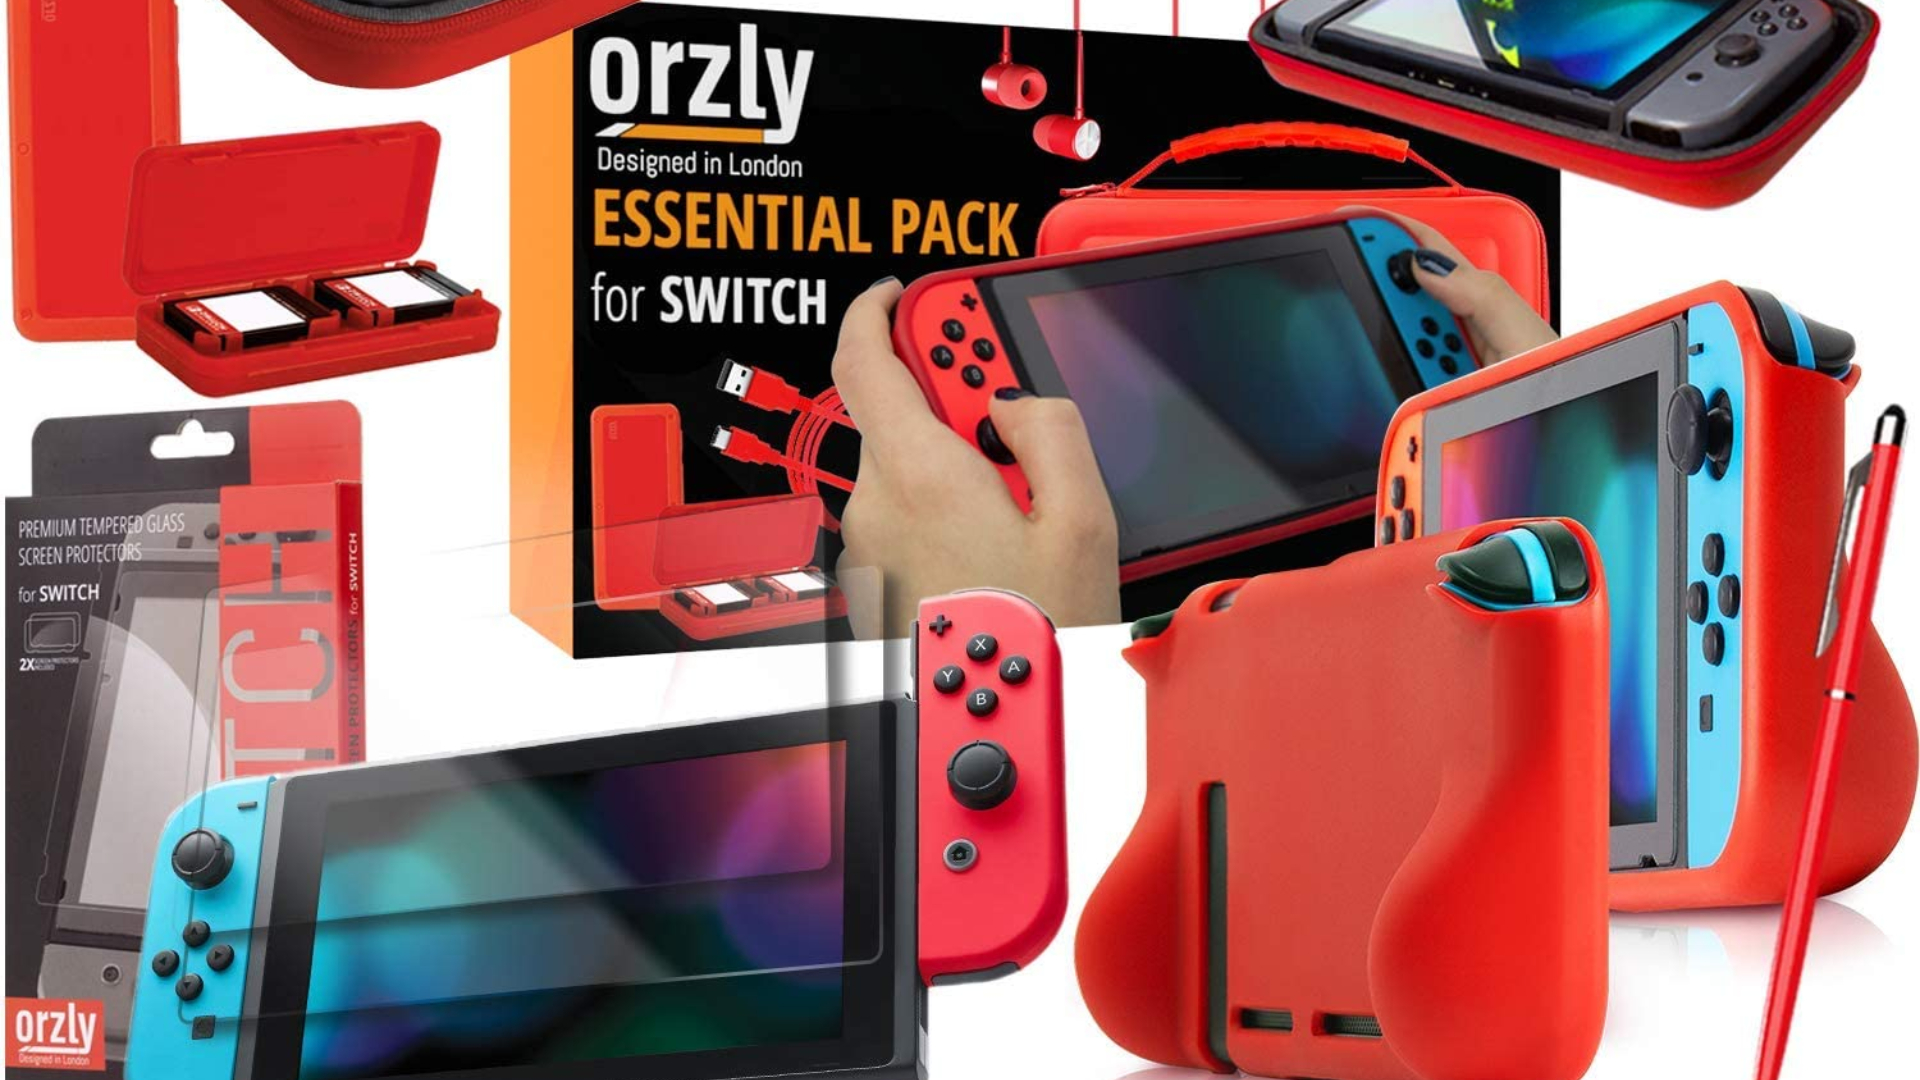 Up your game with 40% off the Orzly Switch accessories bundle